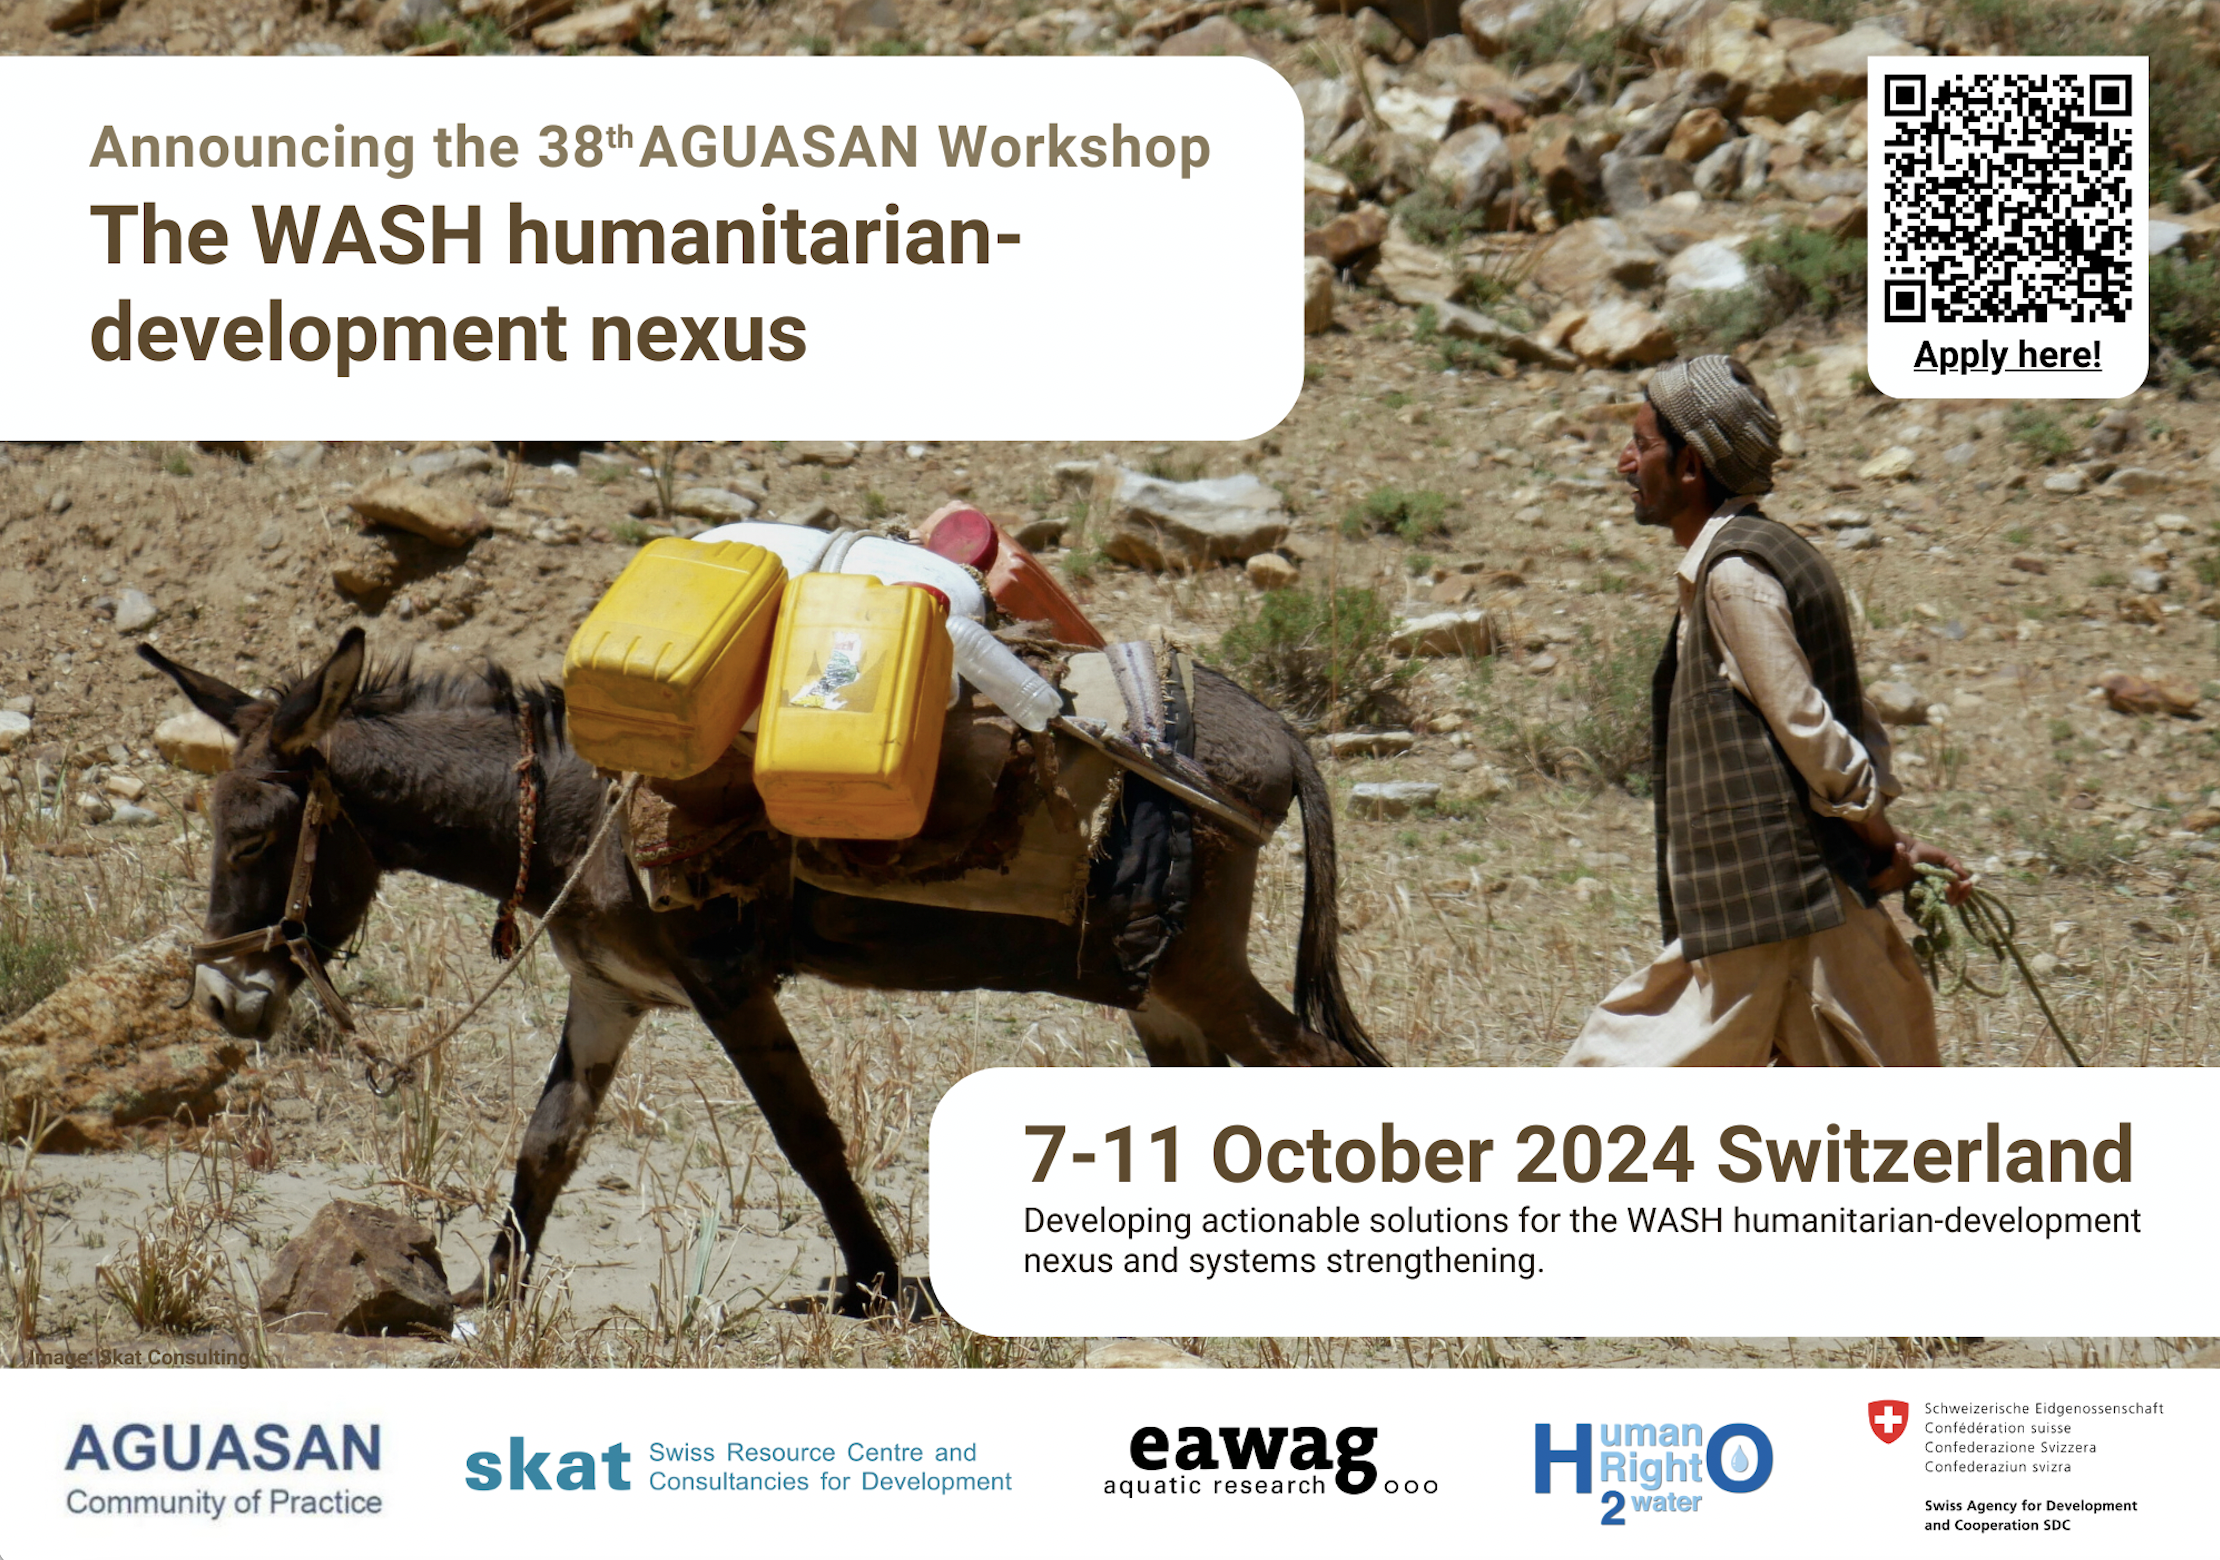 The 38th AGUASAN Workshop will take place in Switzerland from October 7 to 11 on the topic of the WASH humanitarian-development nexus, consideri...